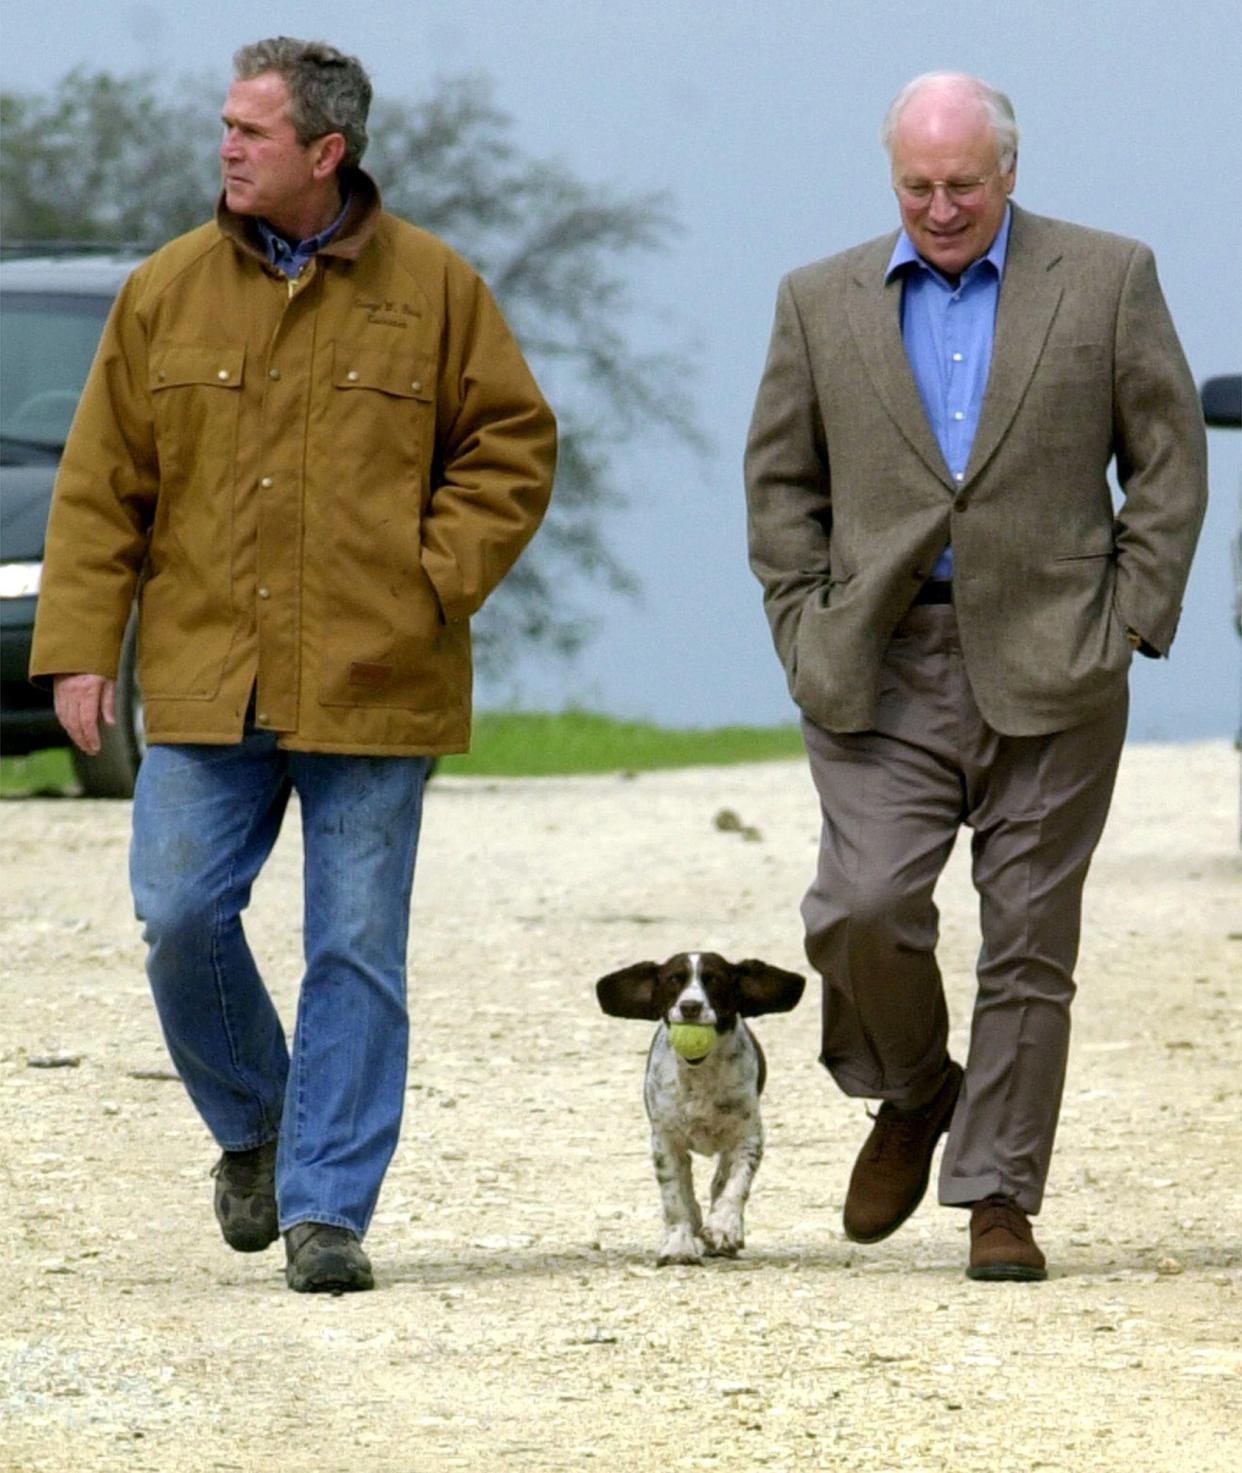 This Nov. 11, 2000 file photo shows then-Republican presidential candidate Texas Gov. George W. Bush and running mate Dick Cheney walk down a dirt road to meet with reporters, followed by Bush's dog Spot, near Crawford, Texas. The arrival of the Biden pets will also mark the next chapter in a long history of pets residing at the White House after a four-year hiatus during the Trump administration. (AP Photo/Eric Draper, File)